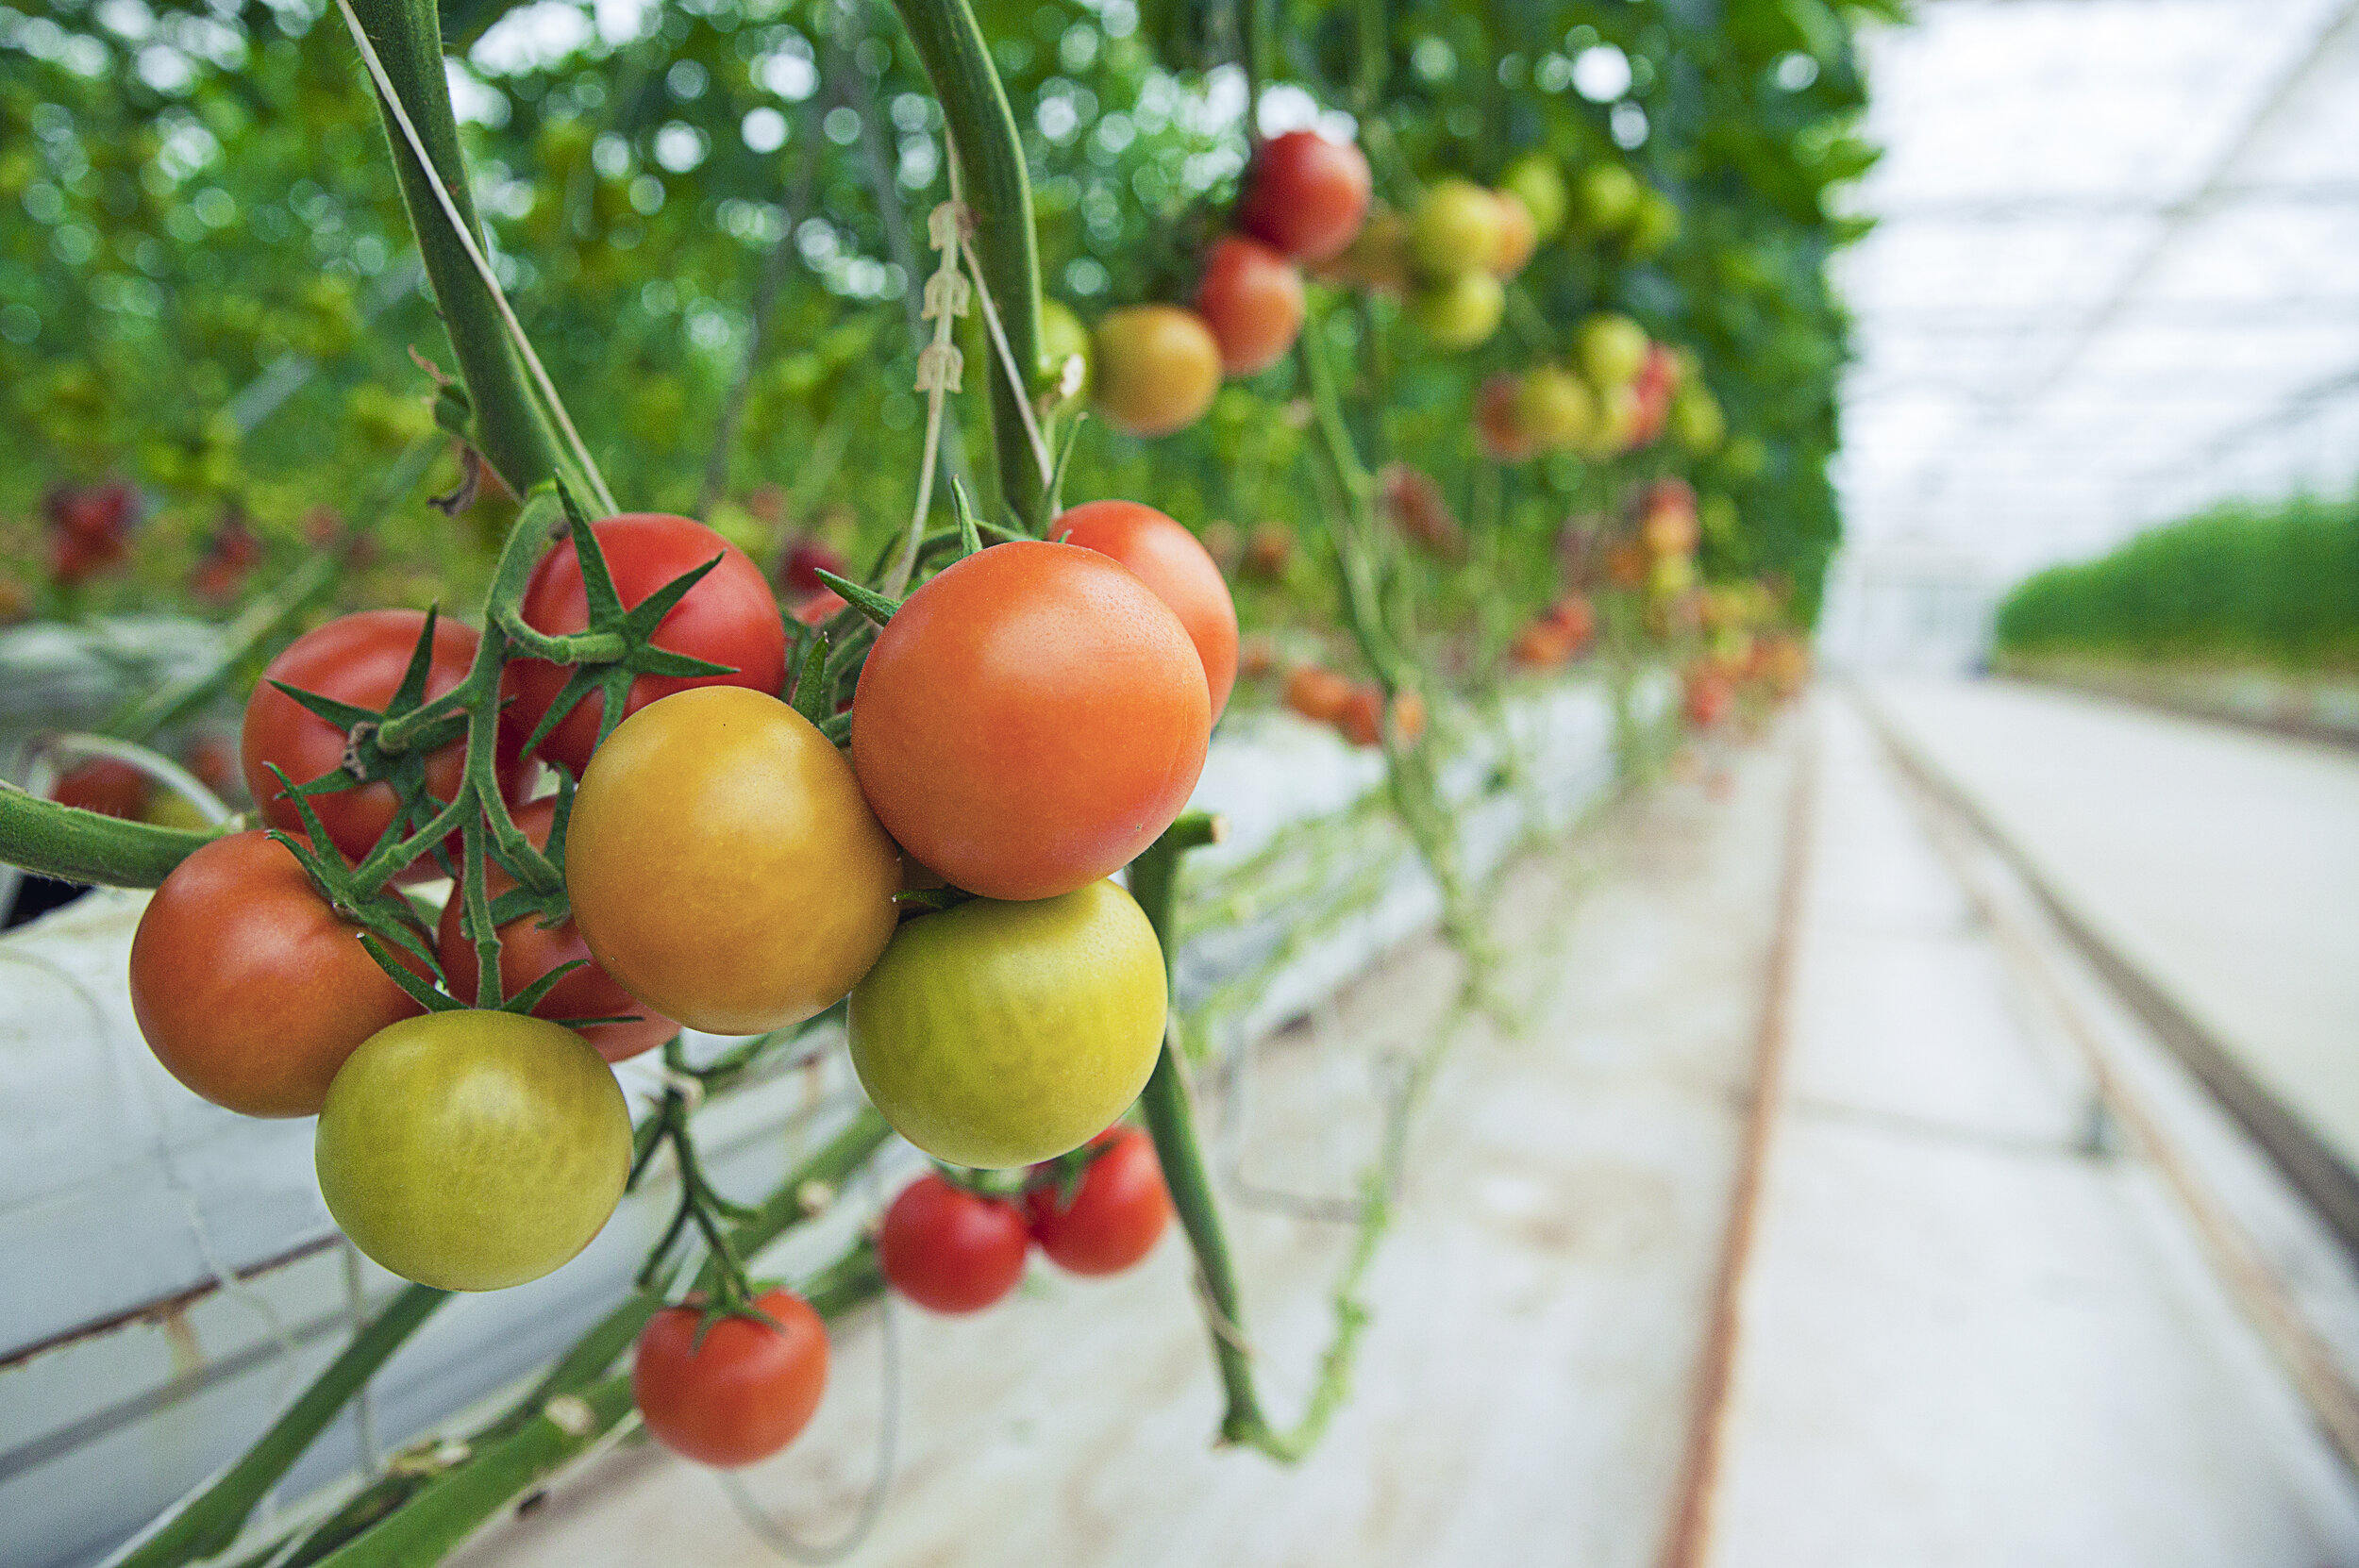 green-yellow-red-tomatoes-hanged-from-their-plants-inside-greenhouse-close-view.jpg